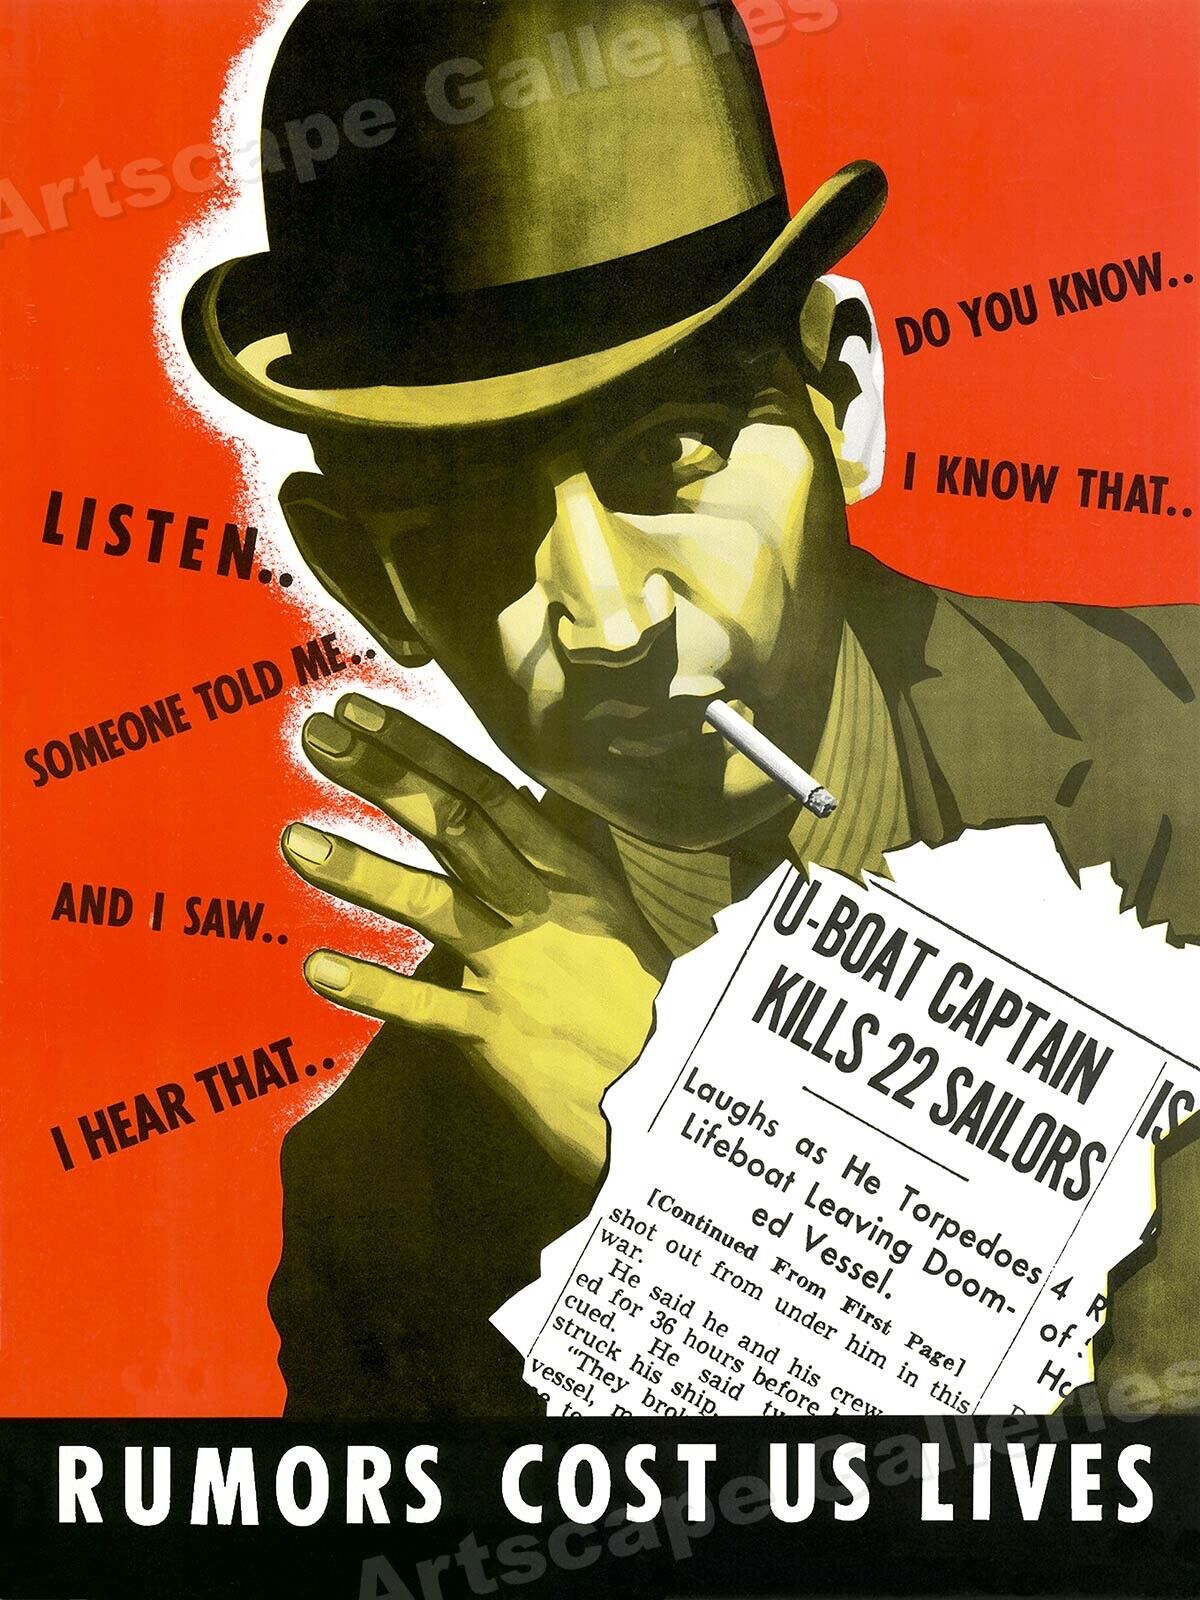 1940s Rumors Cost Lives Vintage Style WWII Propaganda Poster - 18x24